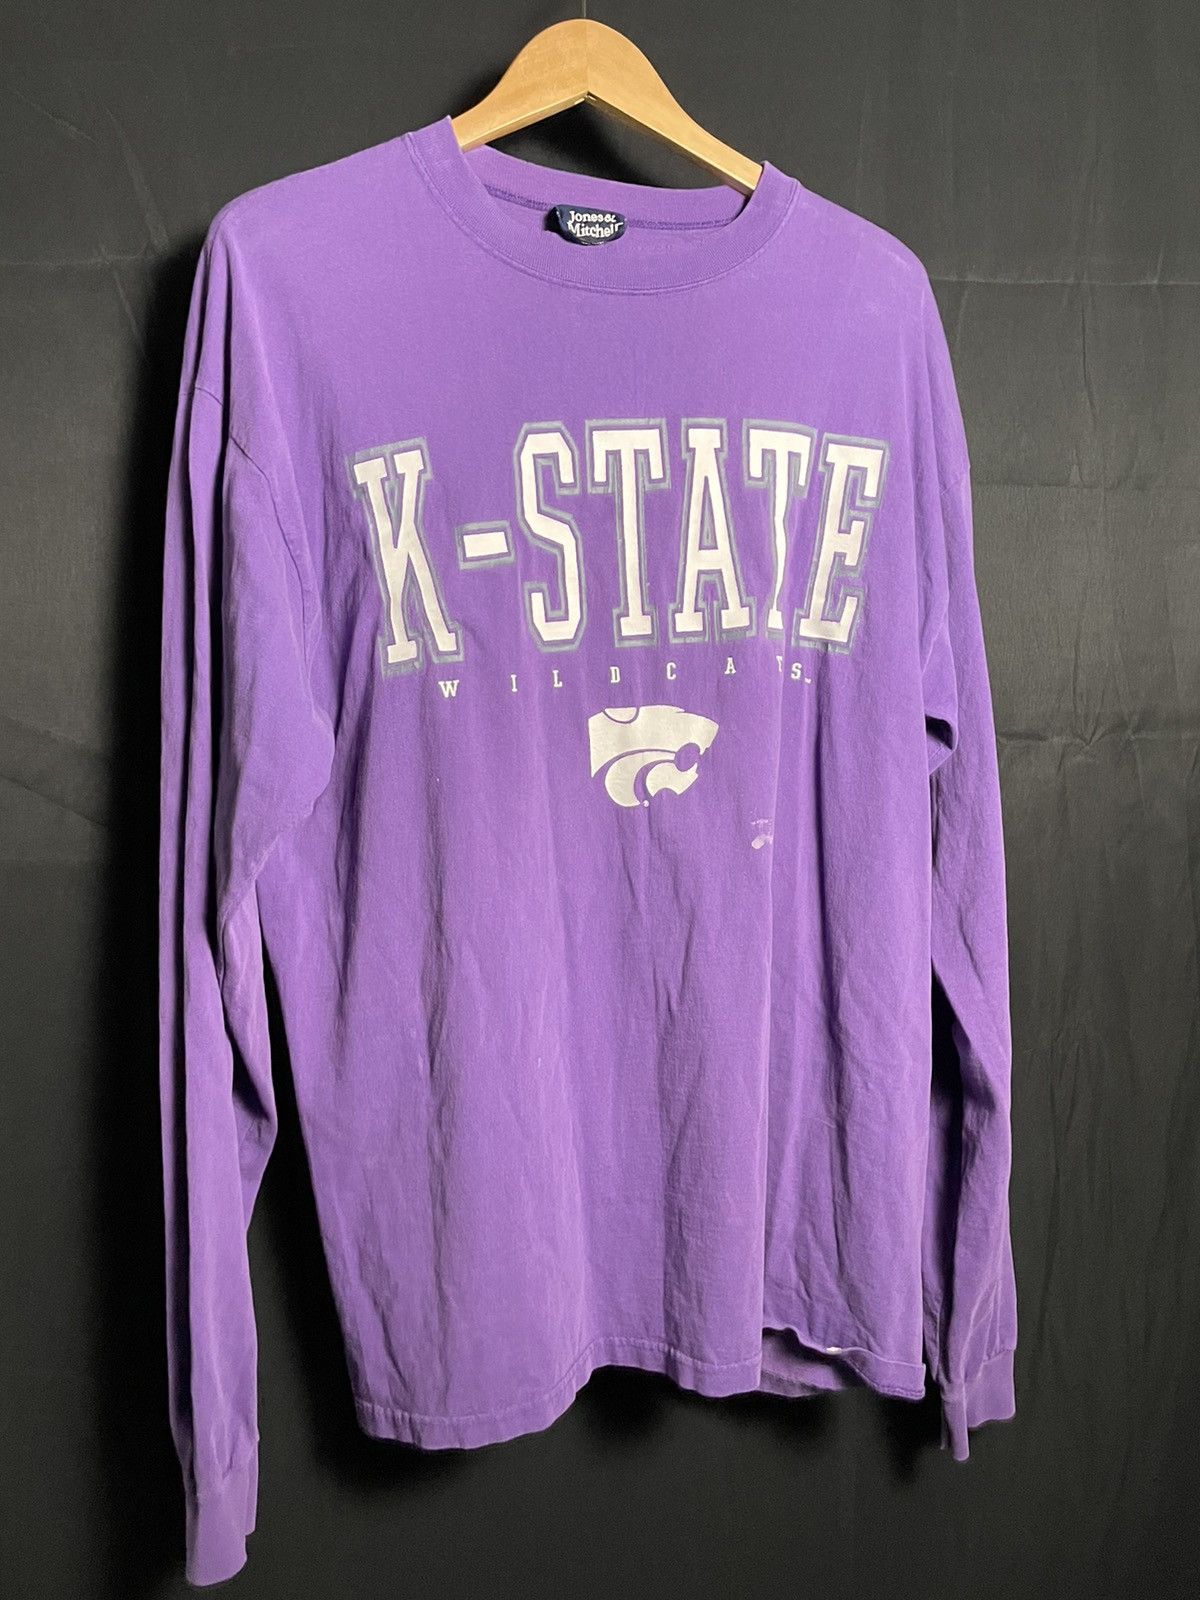 Made In Usa K-state wild cats | Grailed